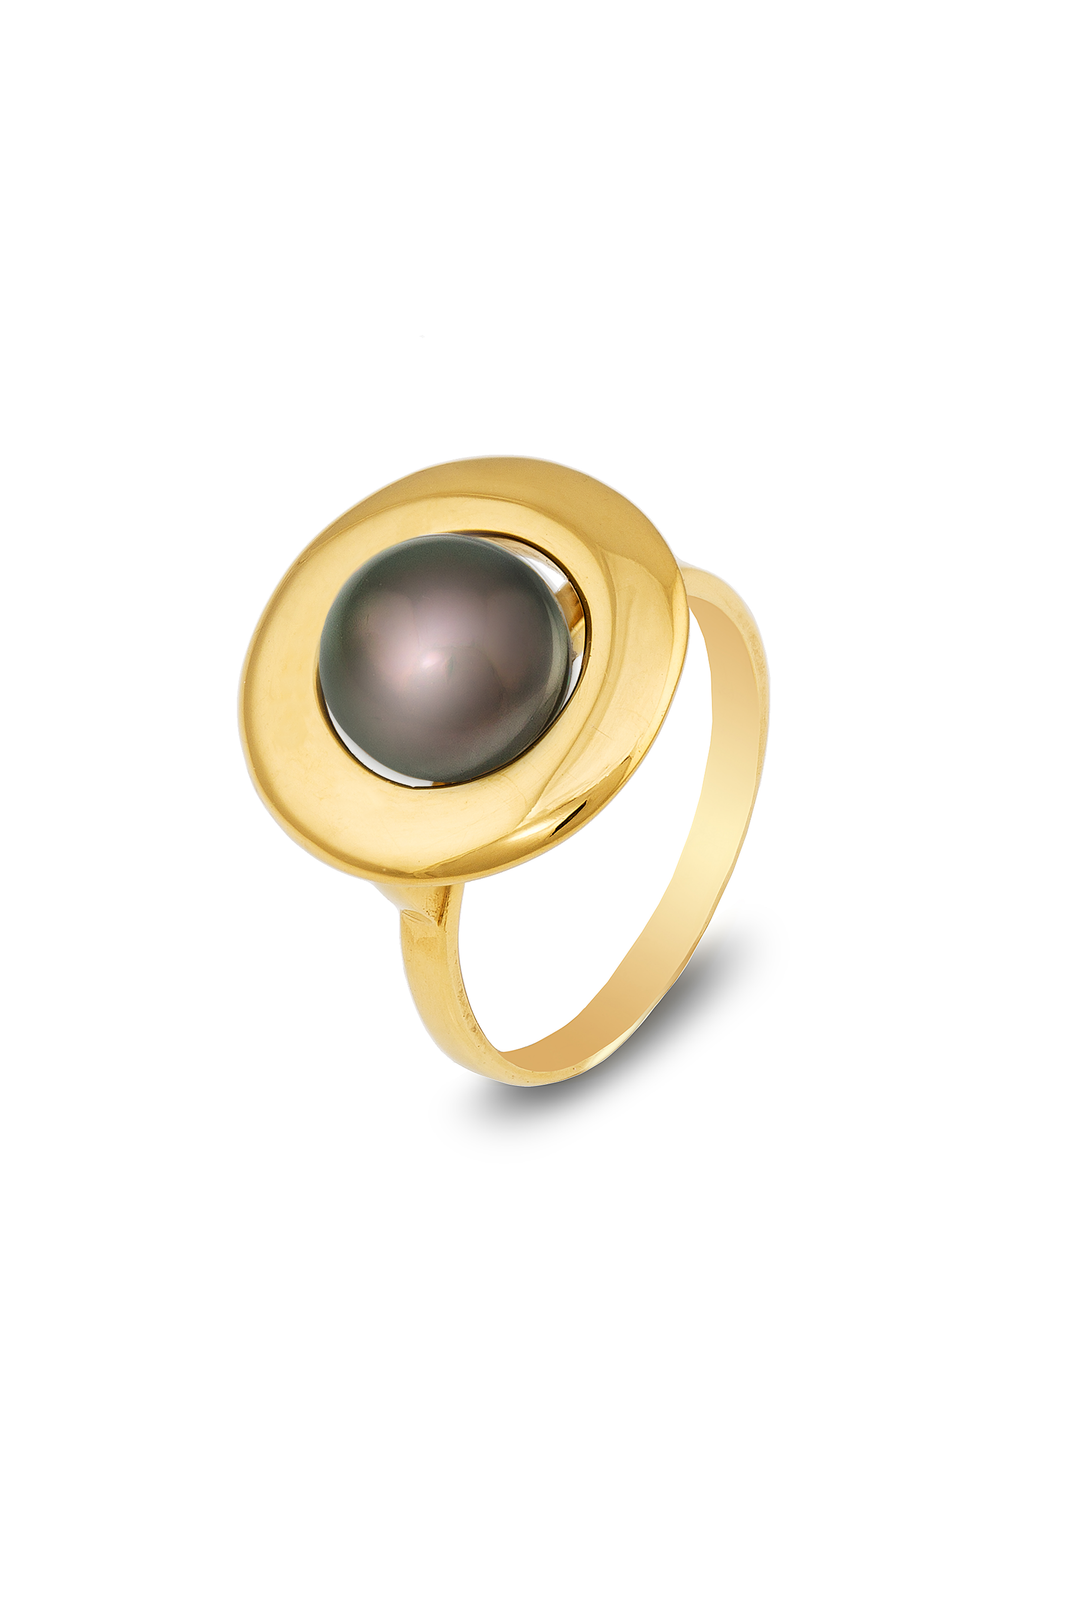 The Collective Dublin - Home to Irish Design - Cosmic Boulevard : Home Planet 9ct Yellow Gold Tahitian Pearl